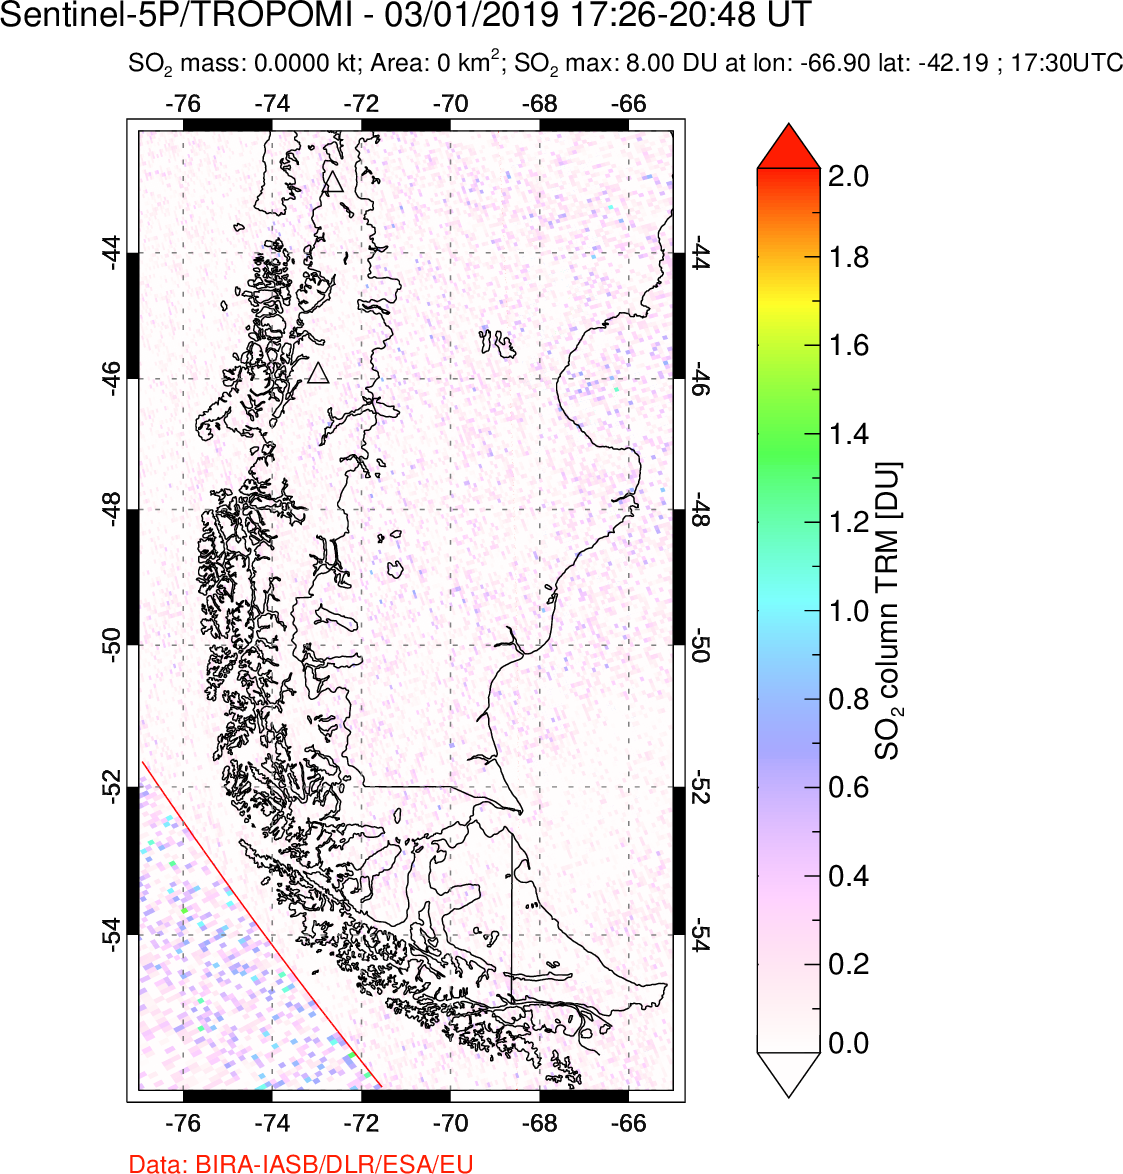 A sulfur dioxide image over Southern Chile on Mar 01, 2019.